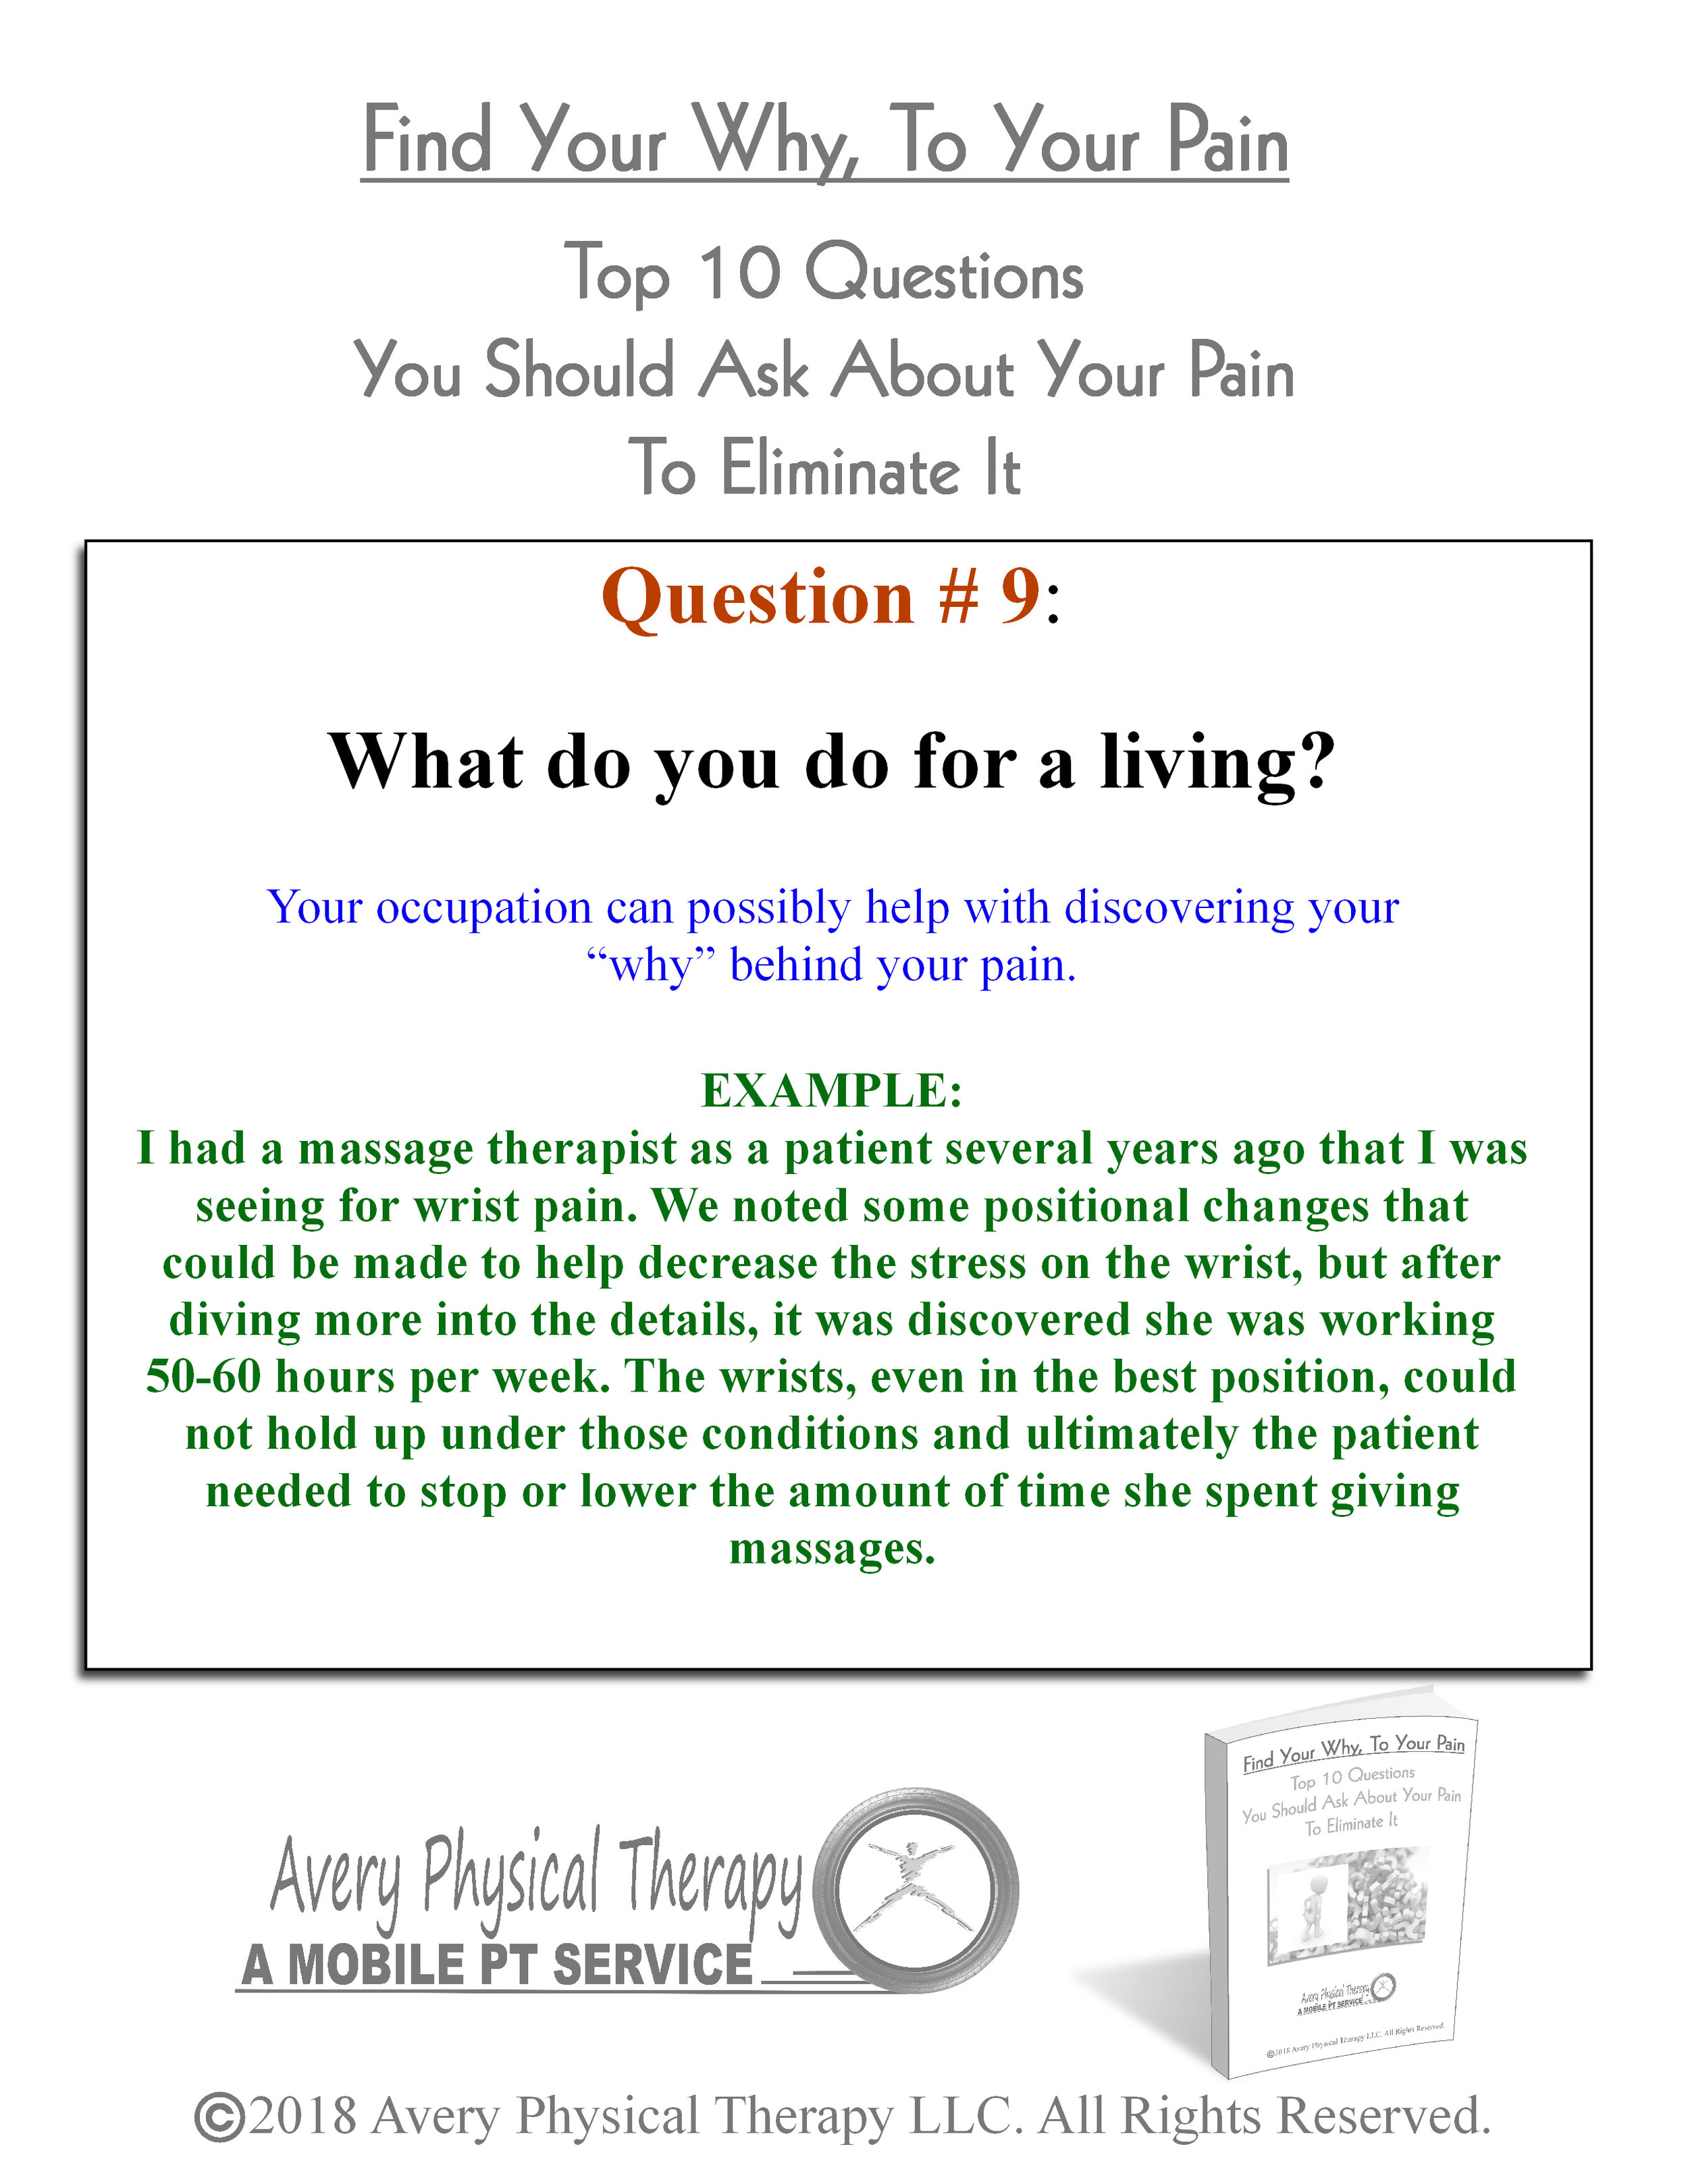 Top 10 Pain Questions 7-10G.JPG